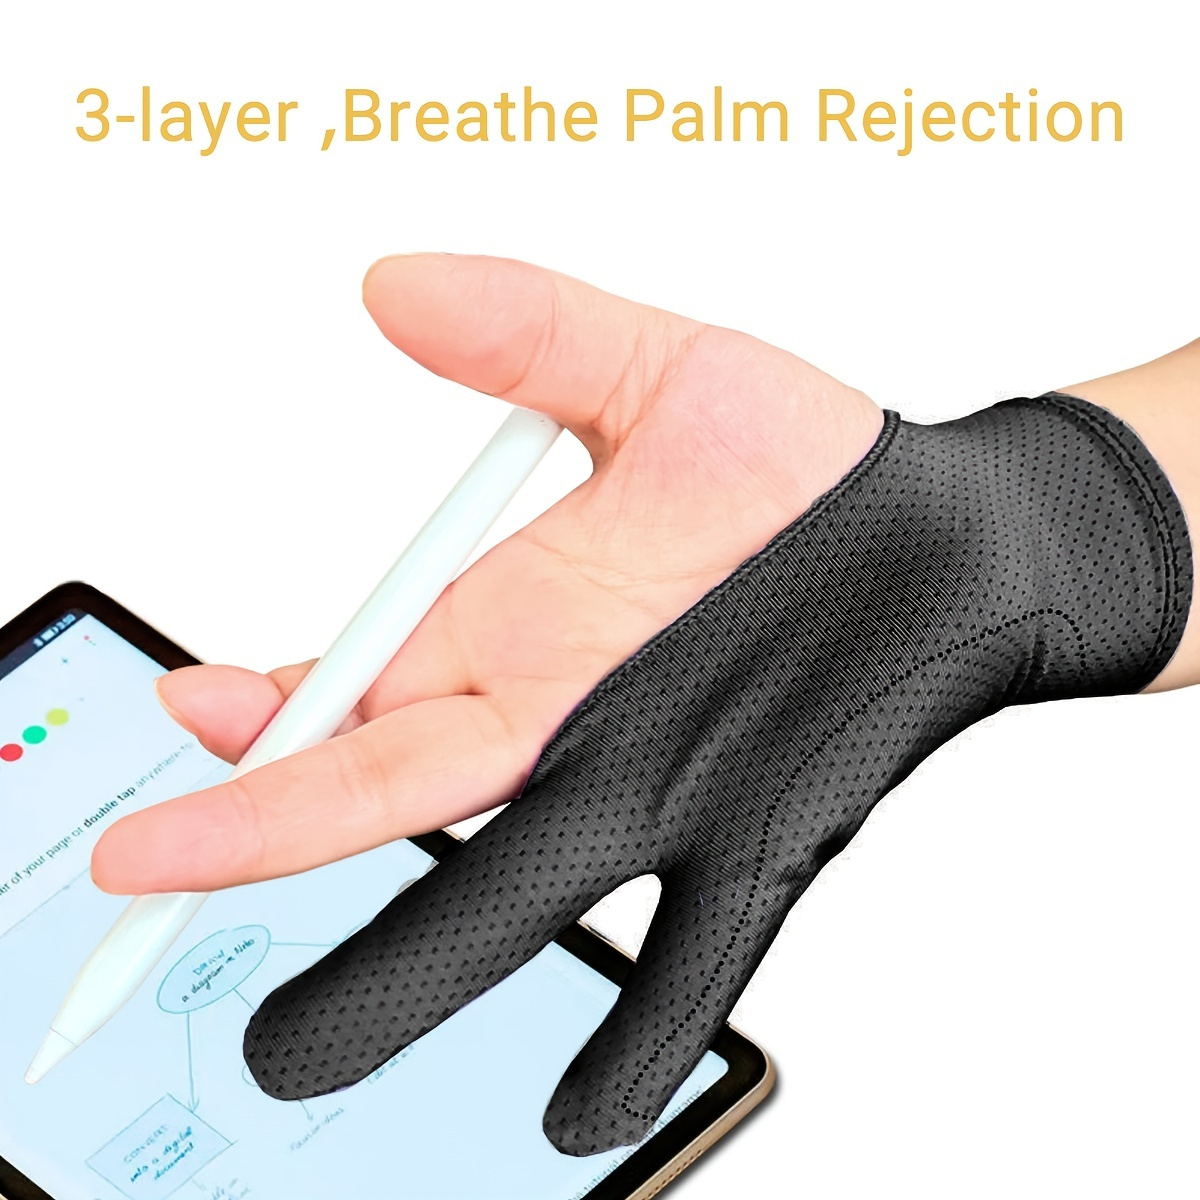 palm rejection glove but the screen is paper and it's my own oils